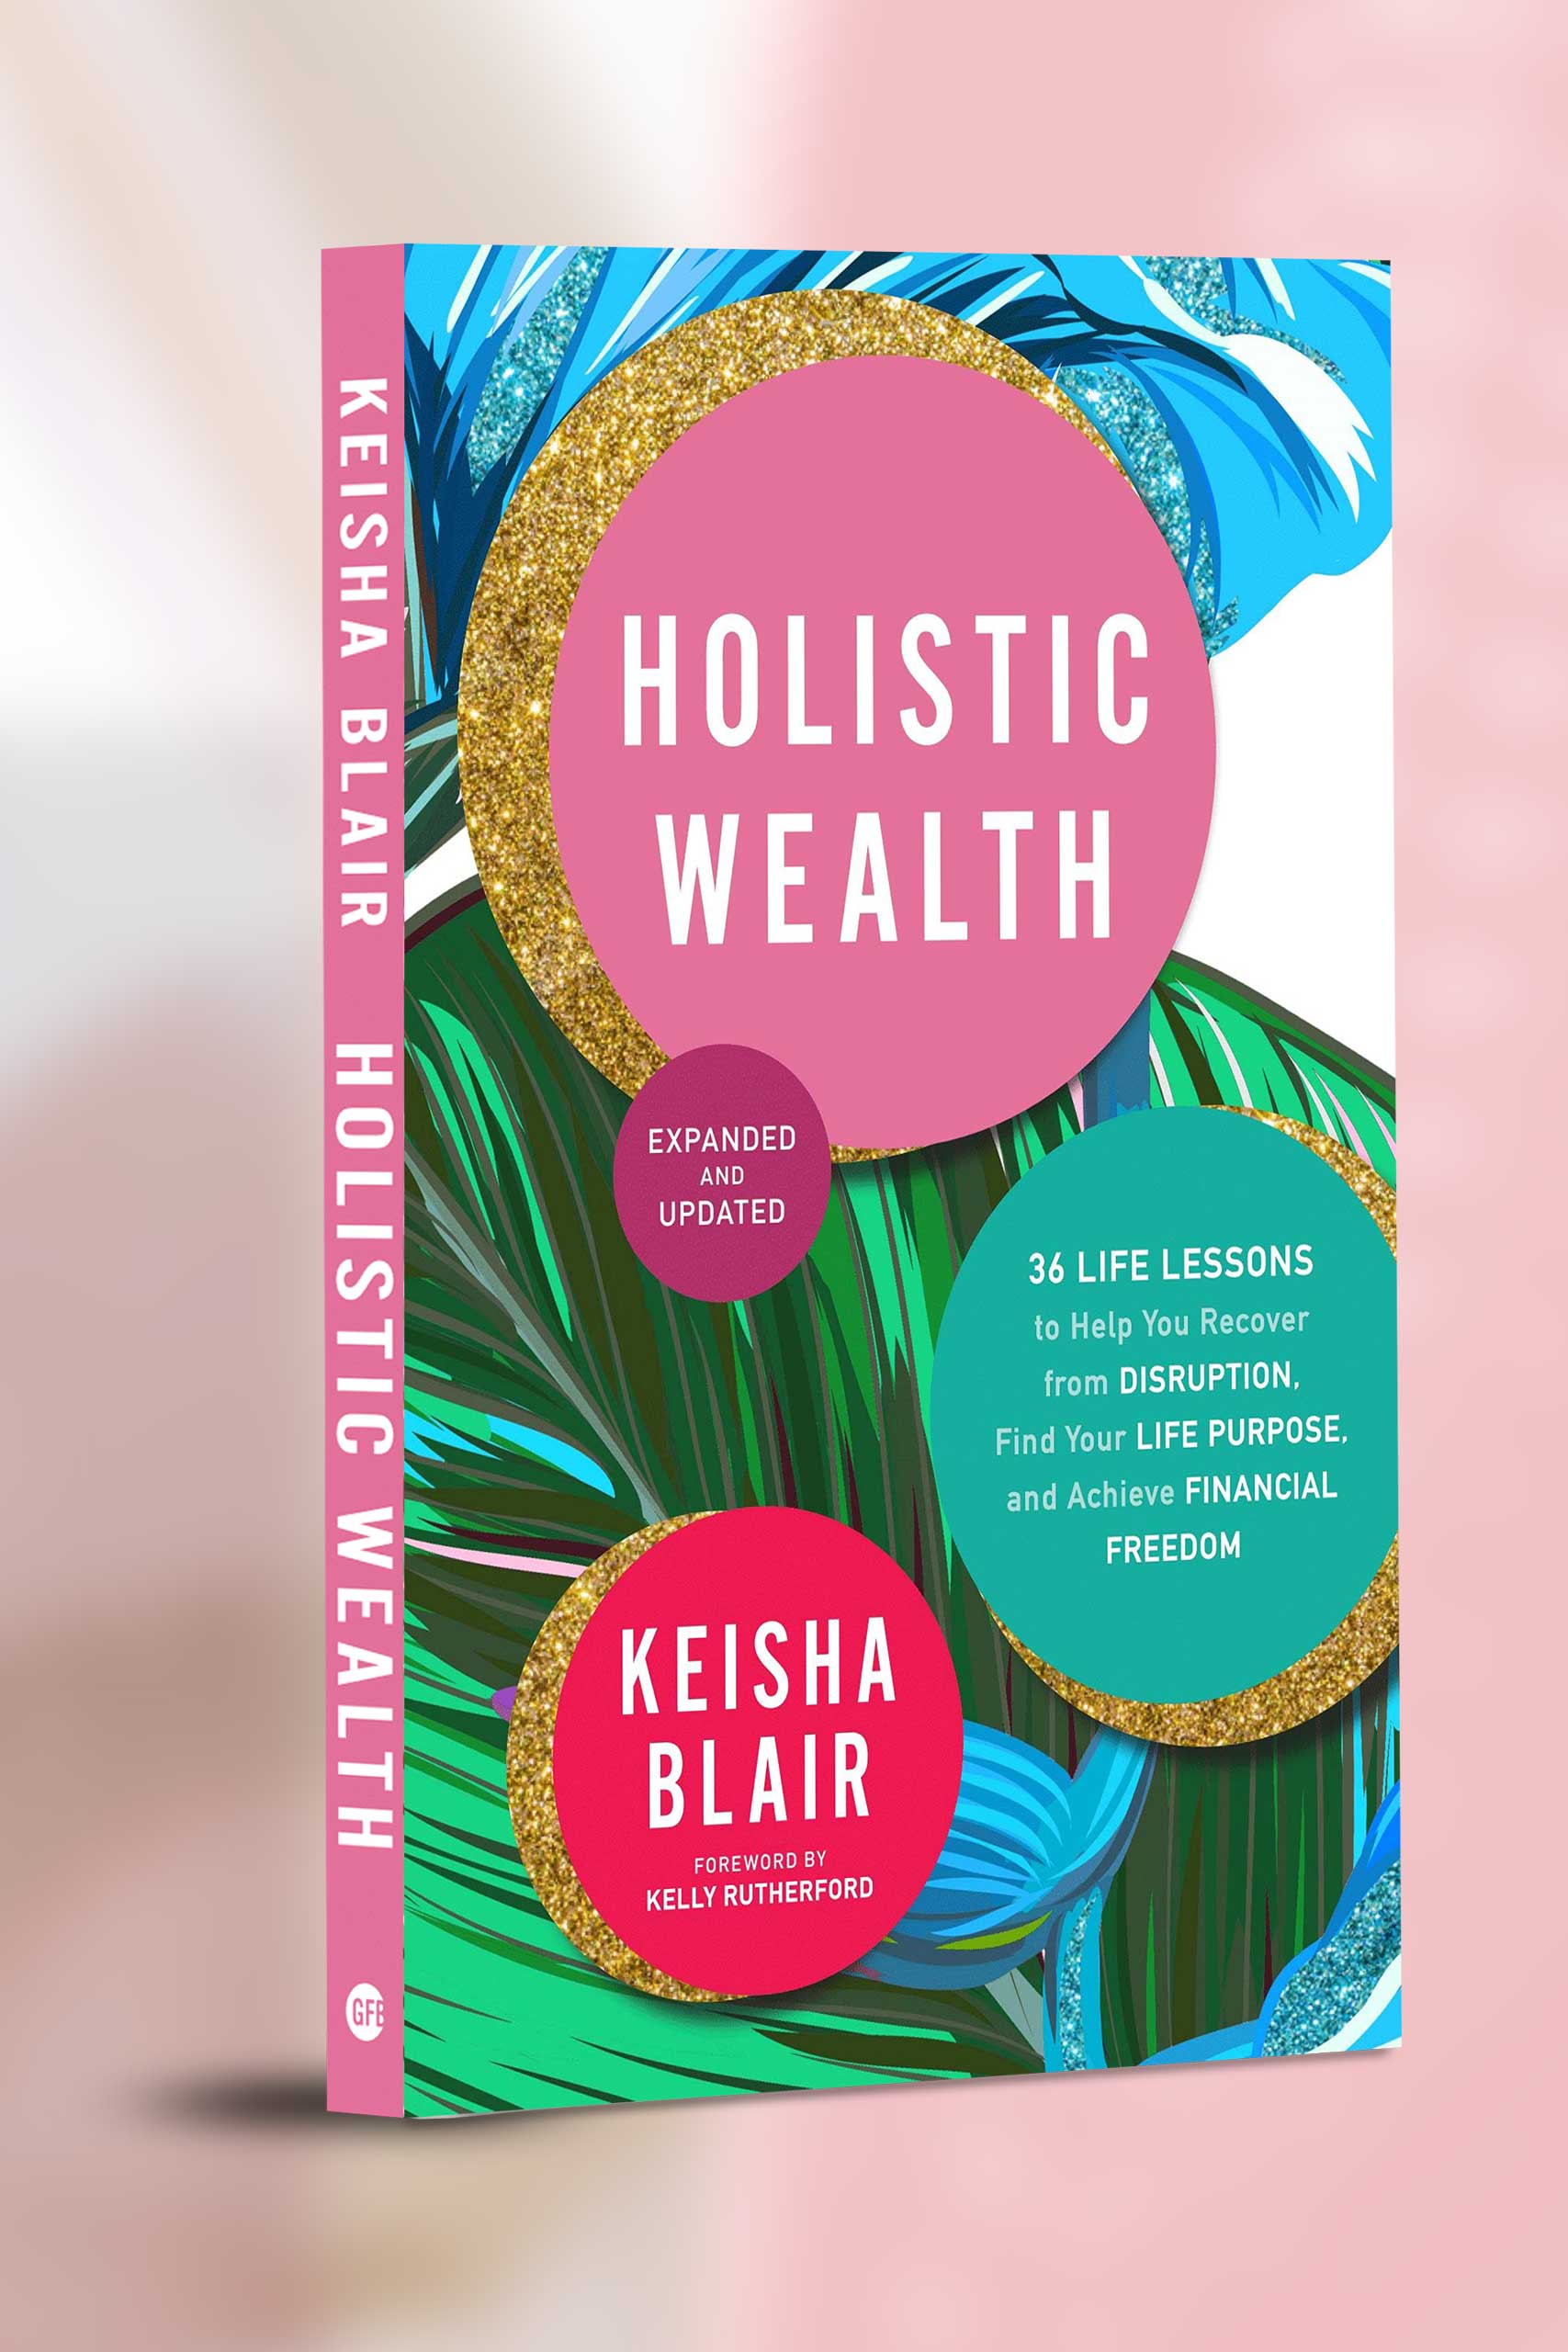 HOLISTIC WEALTH (EXPANDED AND UPDATED) BY KEISHA BLAIR IS NOW AVAILABLE FOR PREORDER. FOREWARD WAS WRITTEN BY ICONIC ACTRESS KELLY RUTHERFORD.